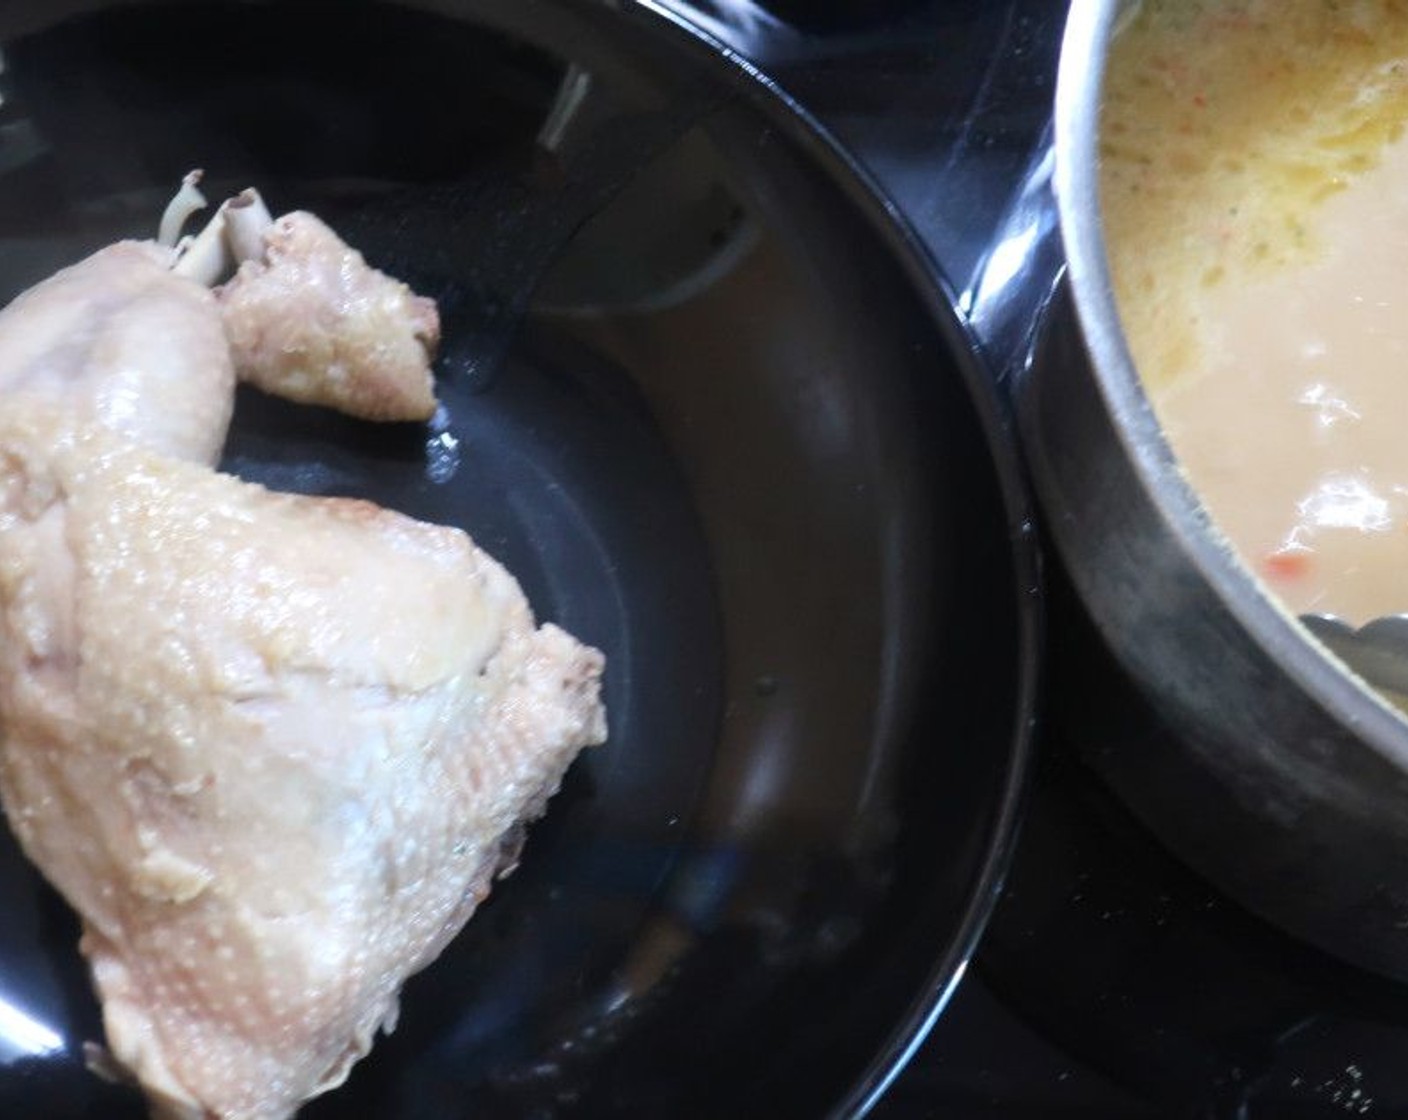 step 3 Simmer until the chicken is tender. Remove the chicken, let it cool enough to handle, then remove the meat from the bones, discard the bones. At this point, if you want the soup to be creamy and smooth, blend the soup with a blender to uncurl the coconut milk.